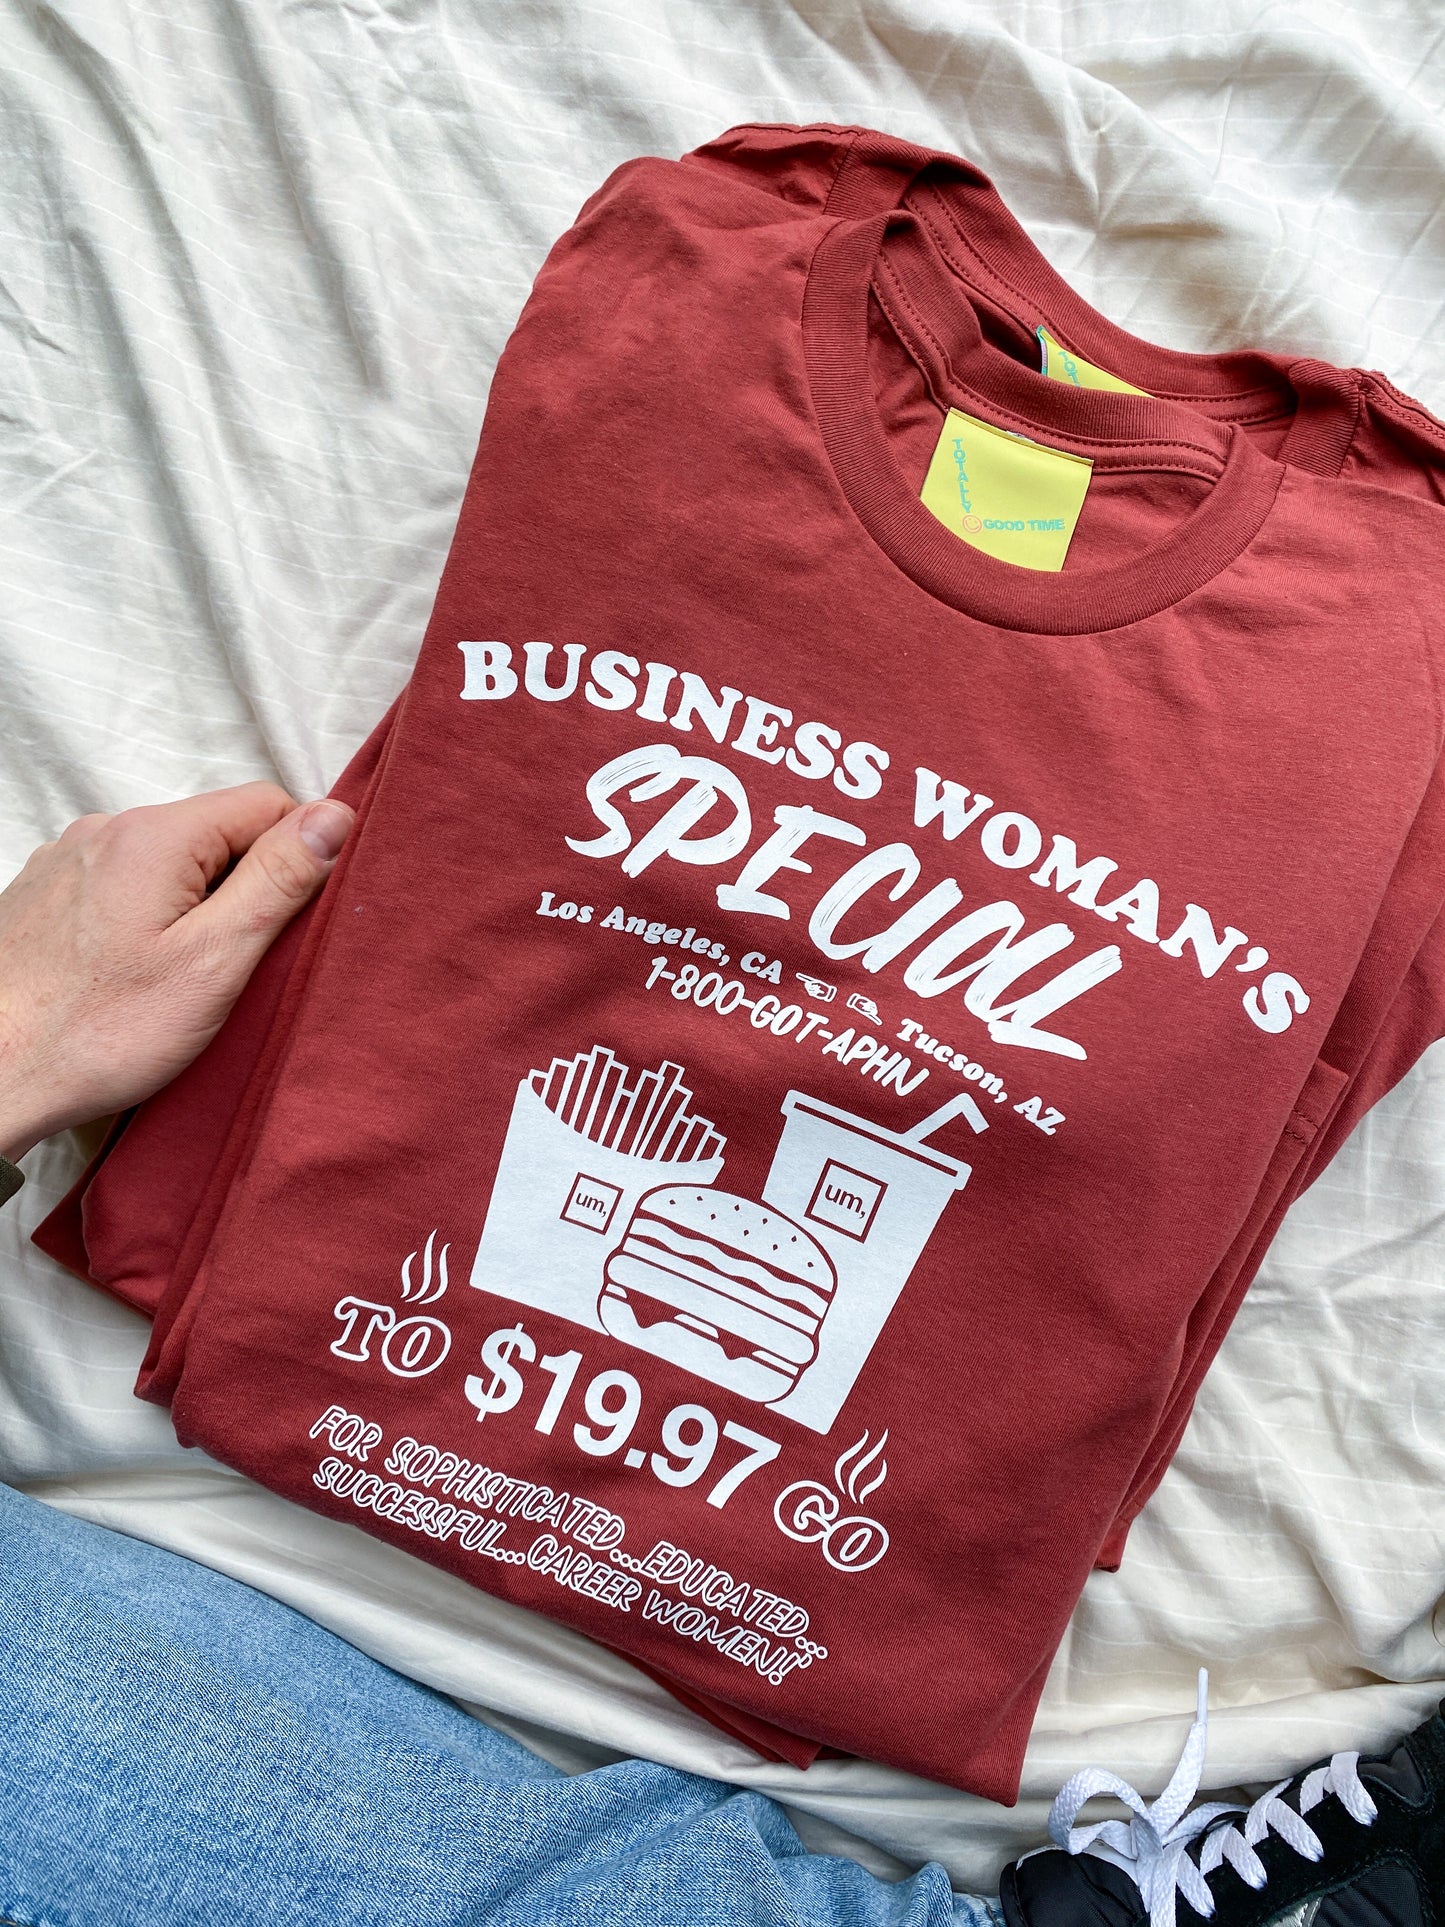 Romy and Michele Business Woman's Special Tee